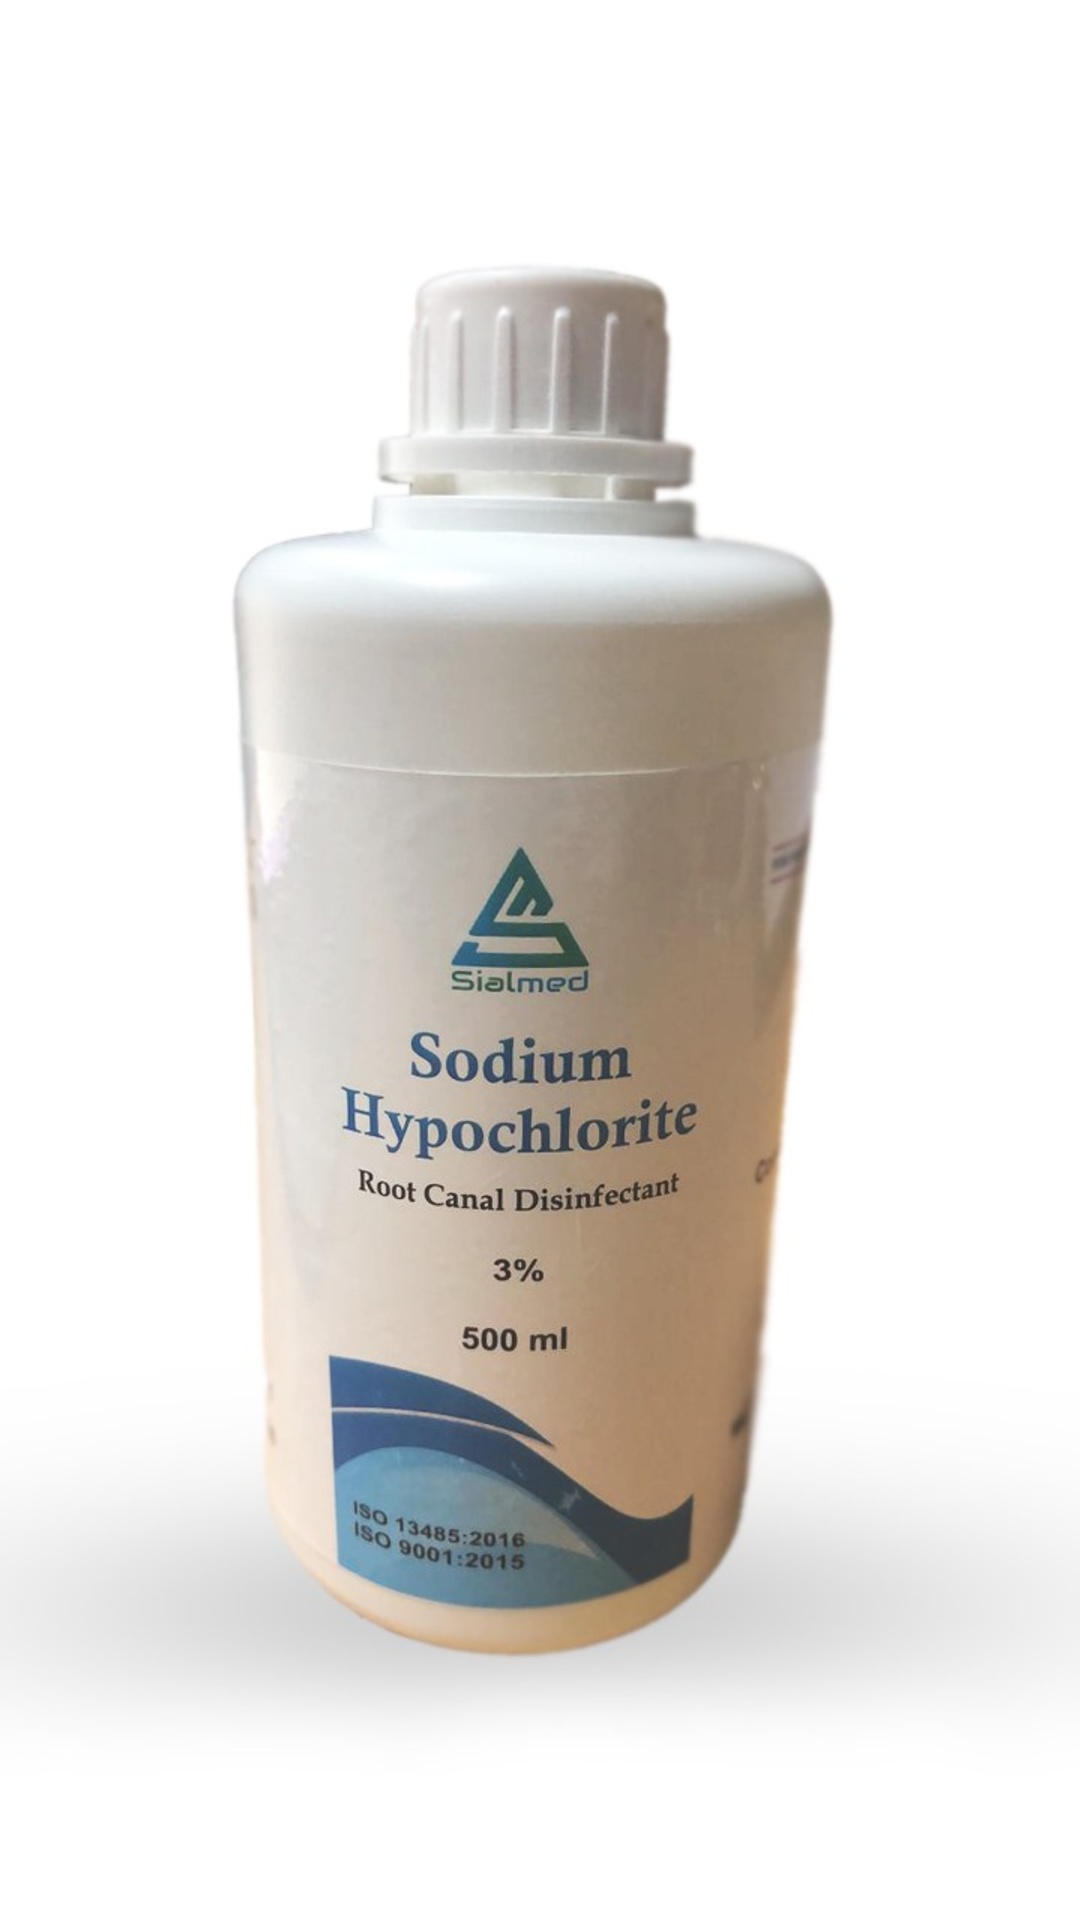 Sialmed 3% Sodium Hypochlorite Root Canal Disinfectant 500ml